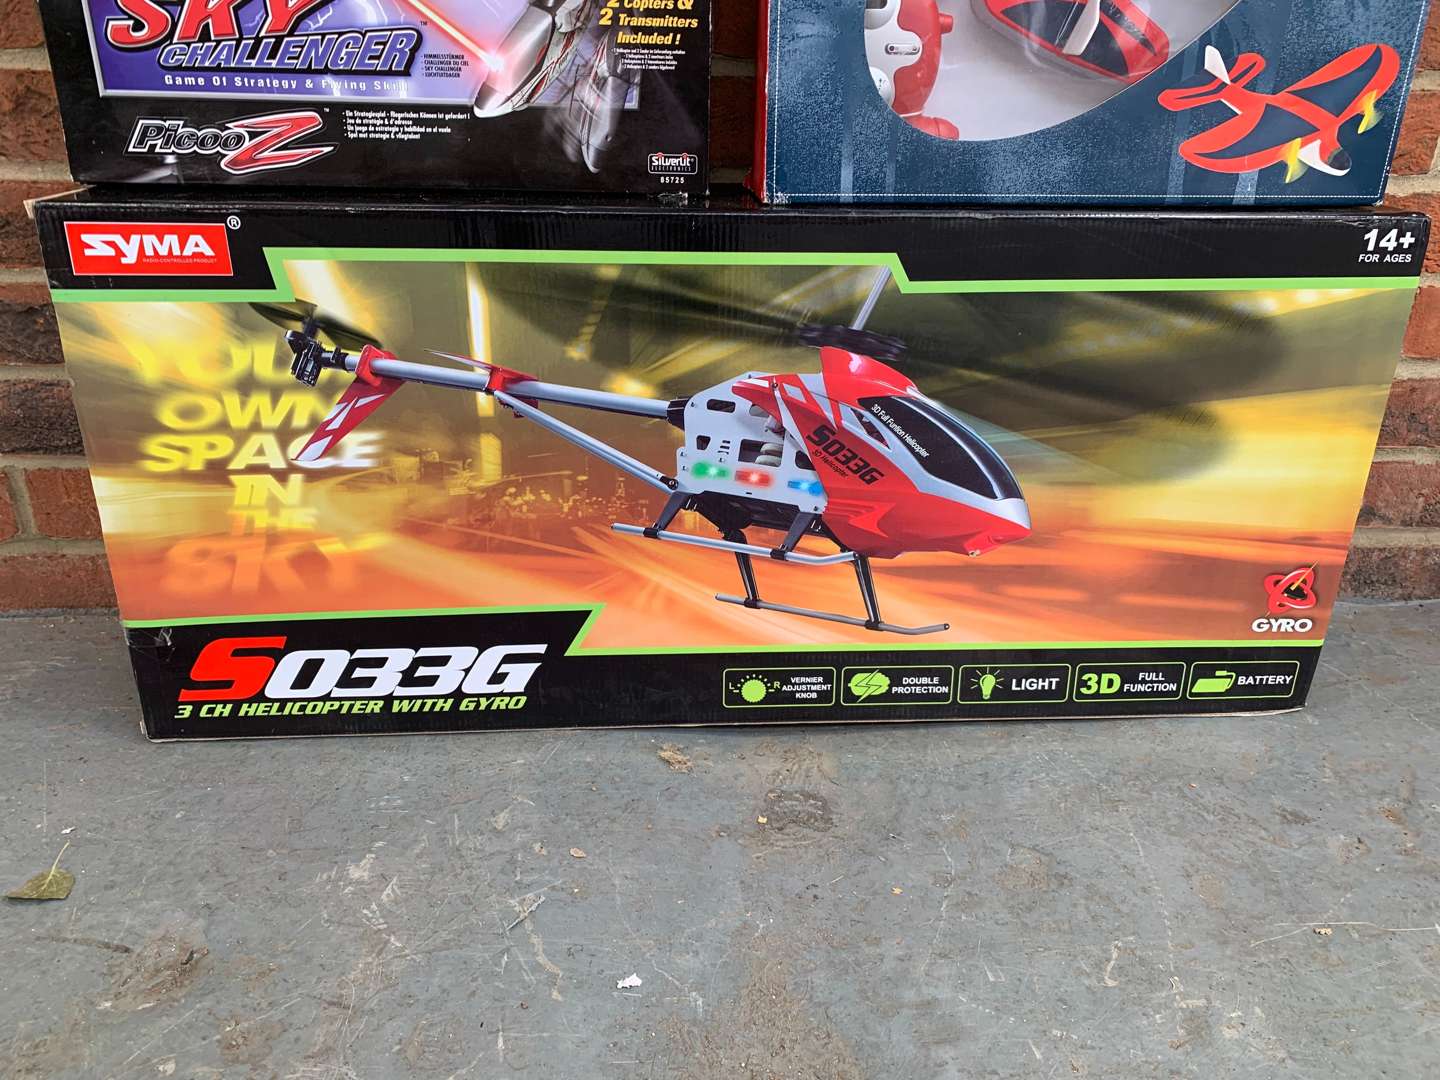 <p>Two Remote Controlled Helicopters & Plane</p>